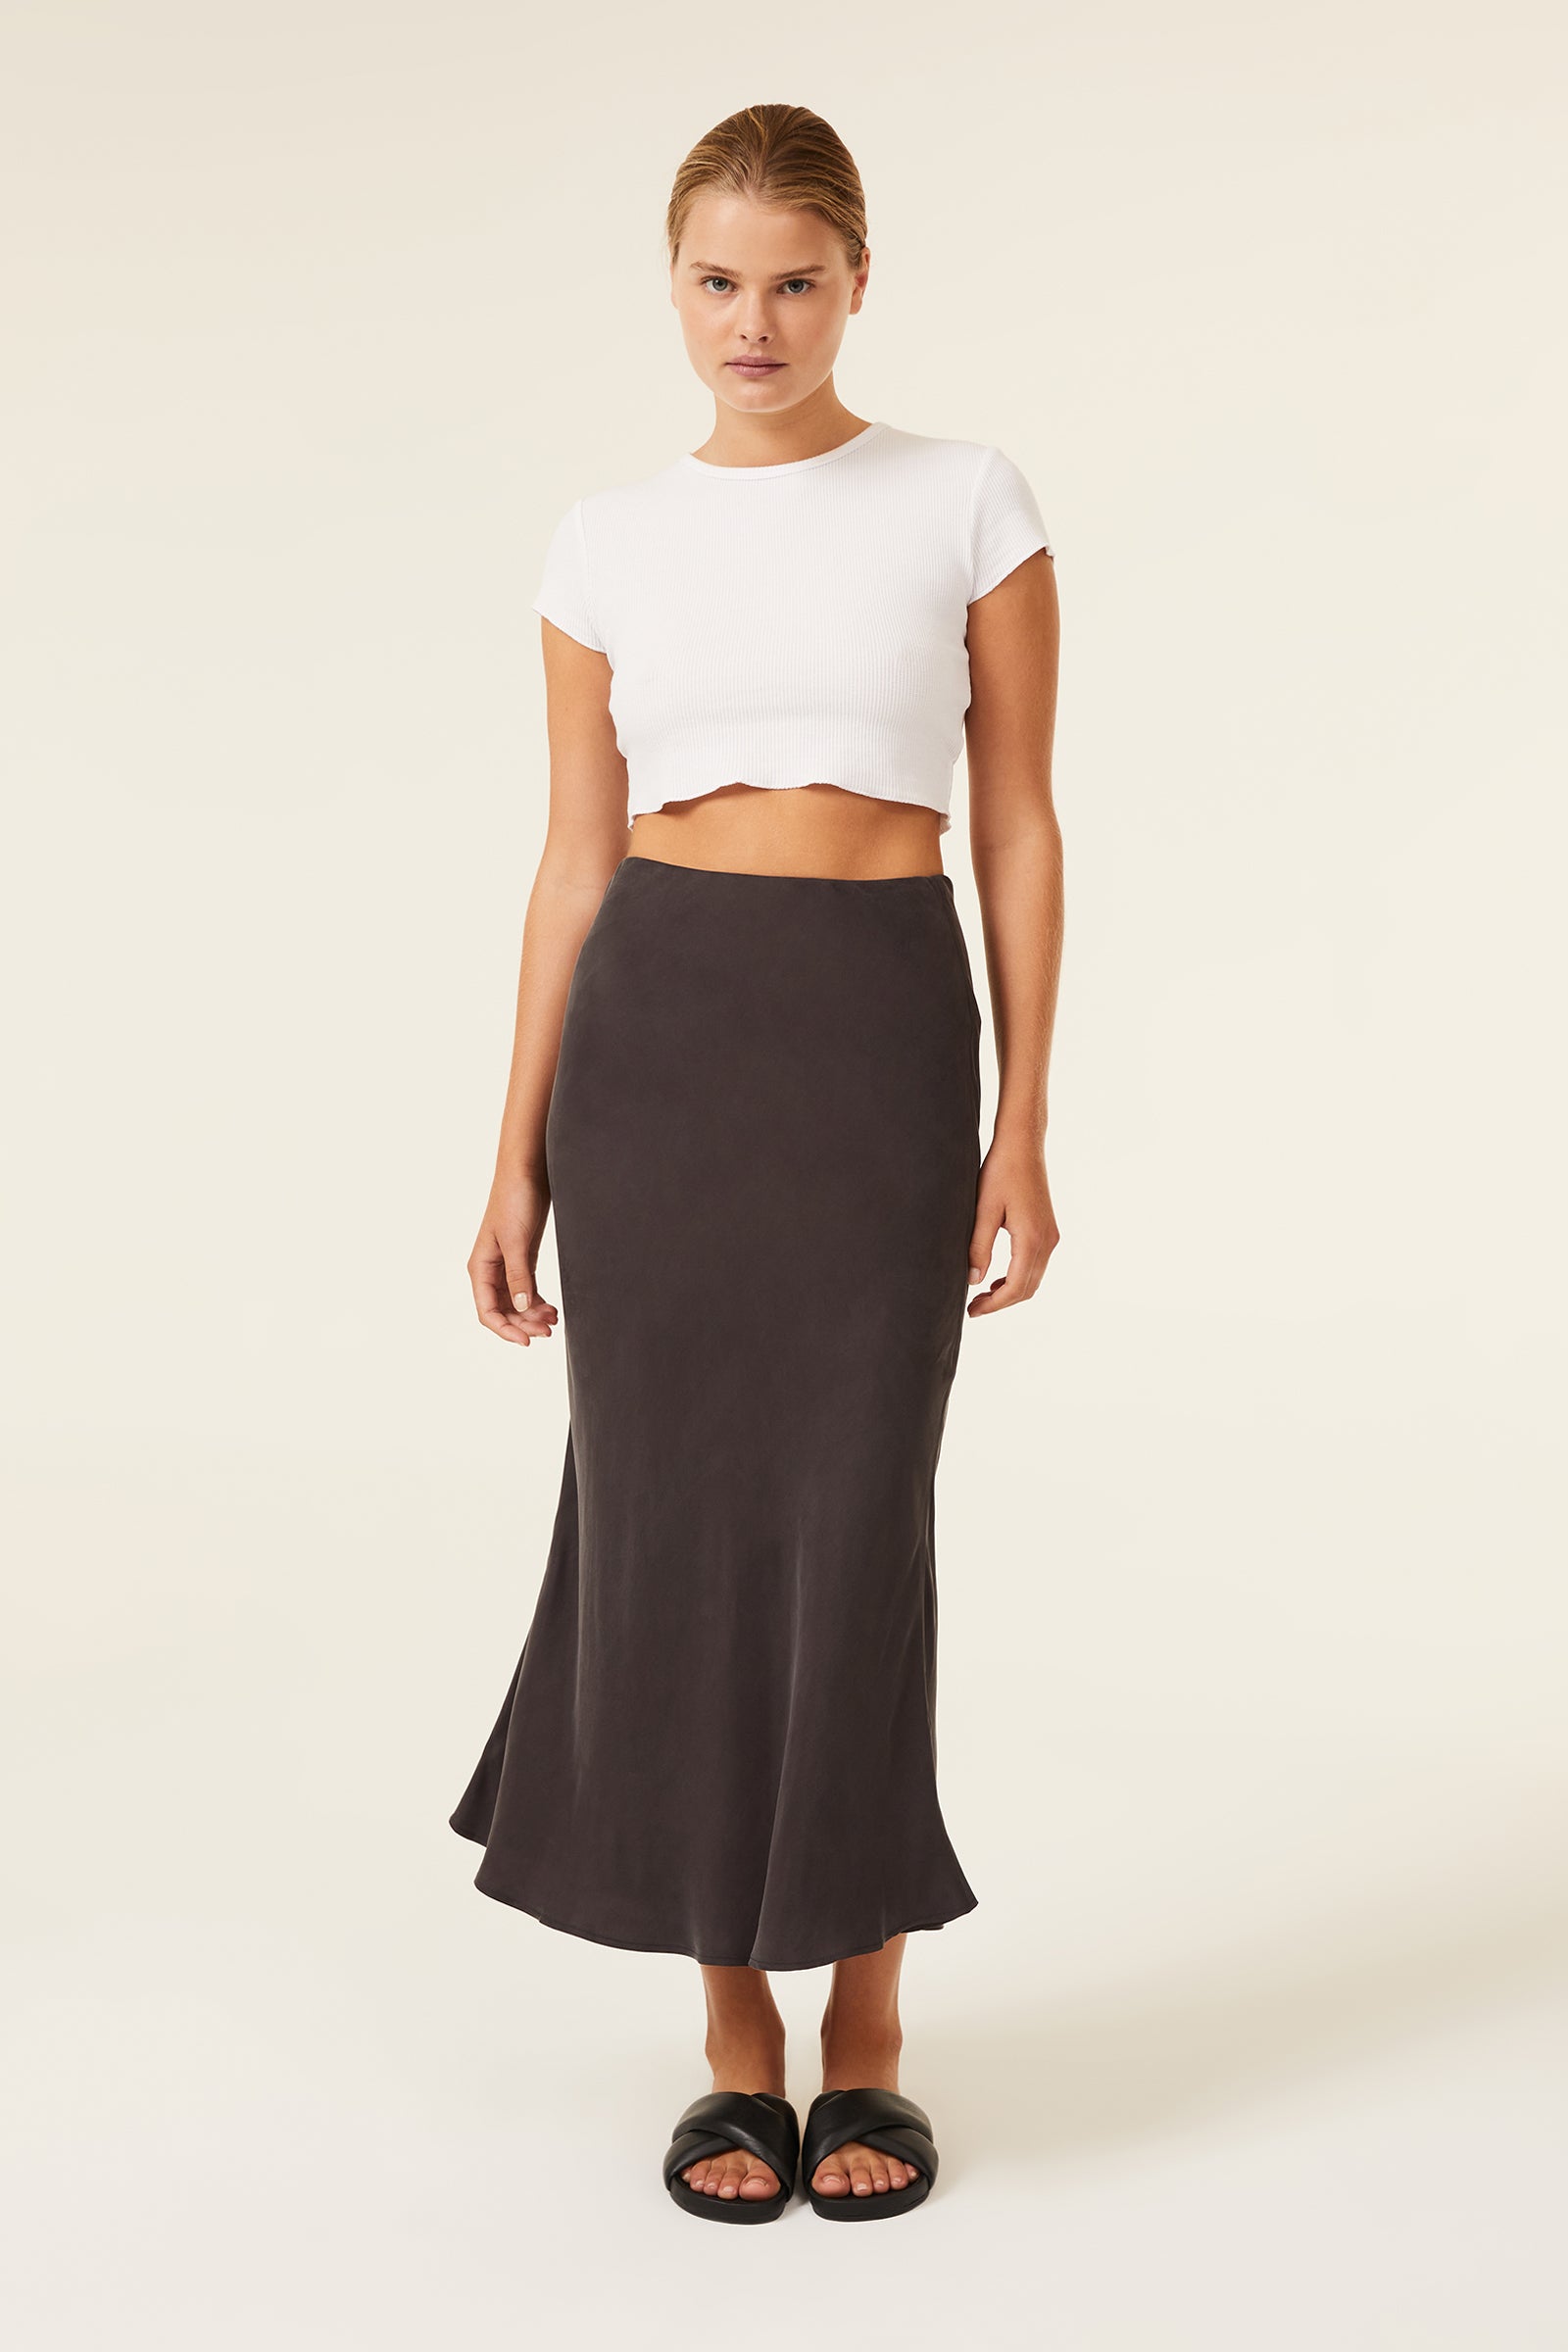 Nude Lucy Harlow Cupro Midi Skirt In A Dark Grey In A Brown Coal Colour 